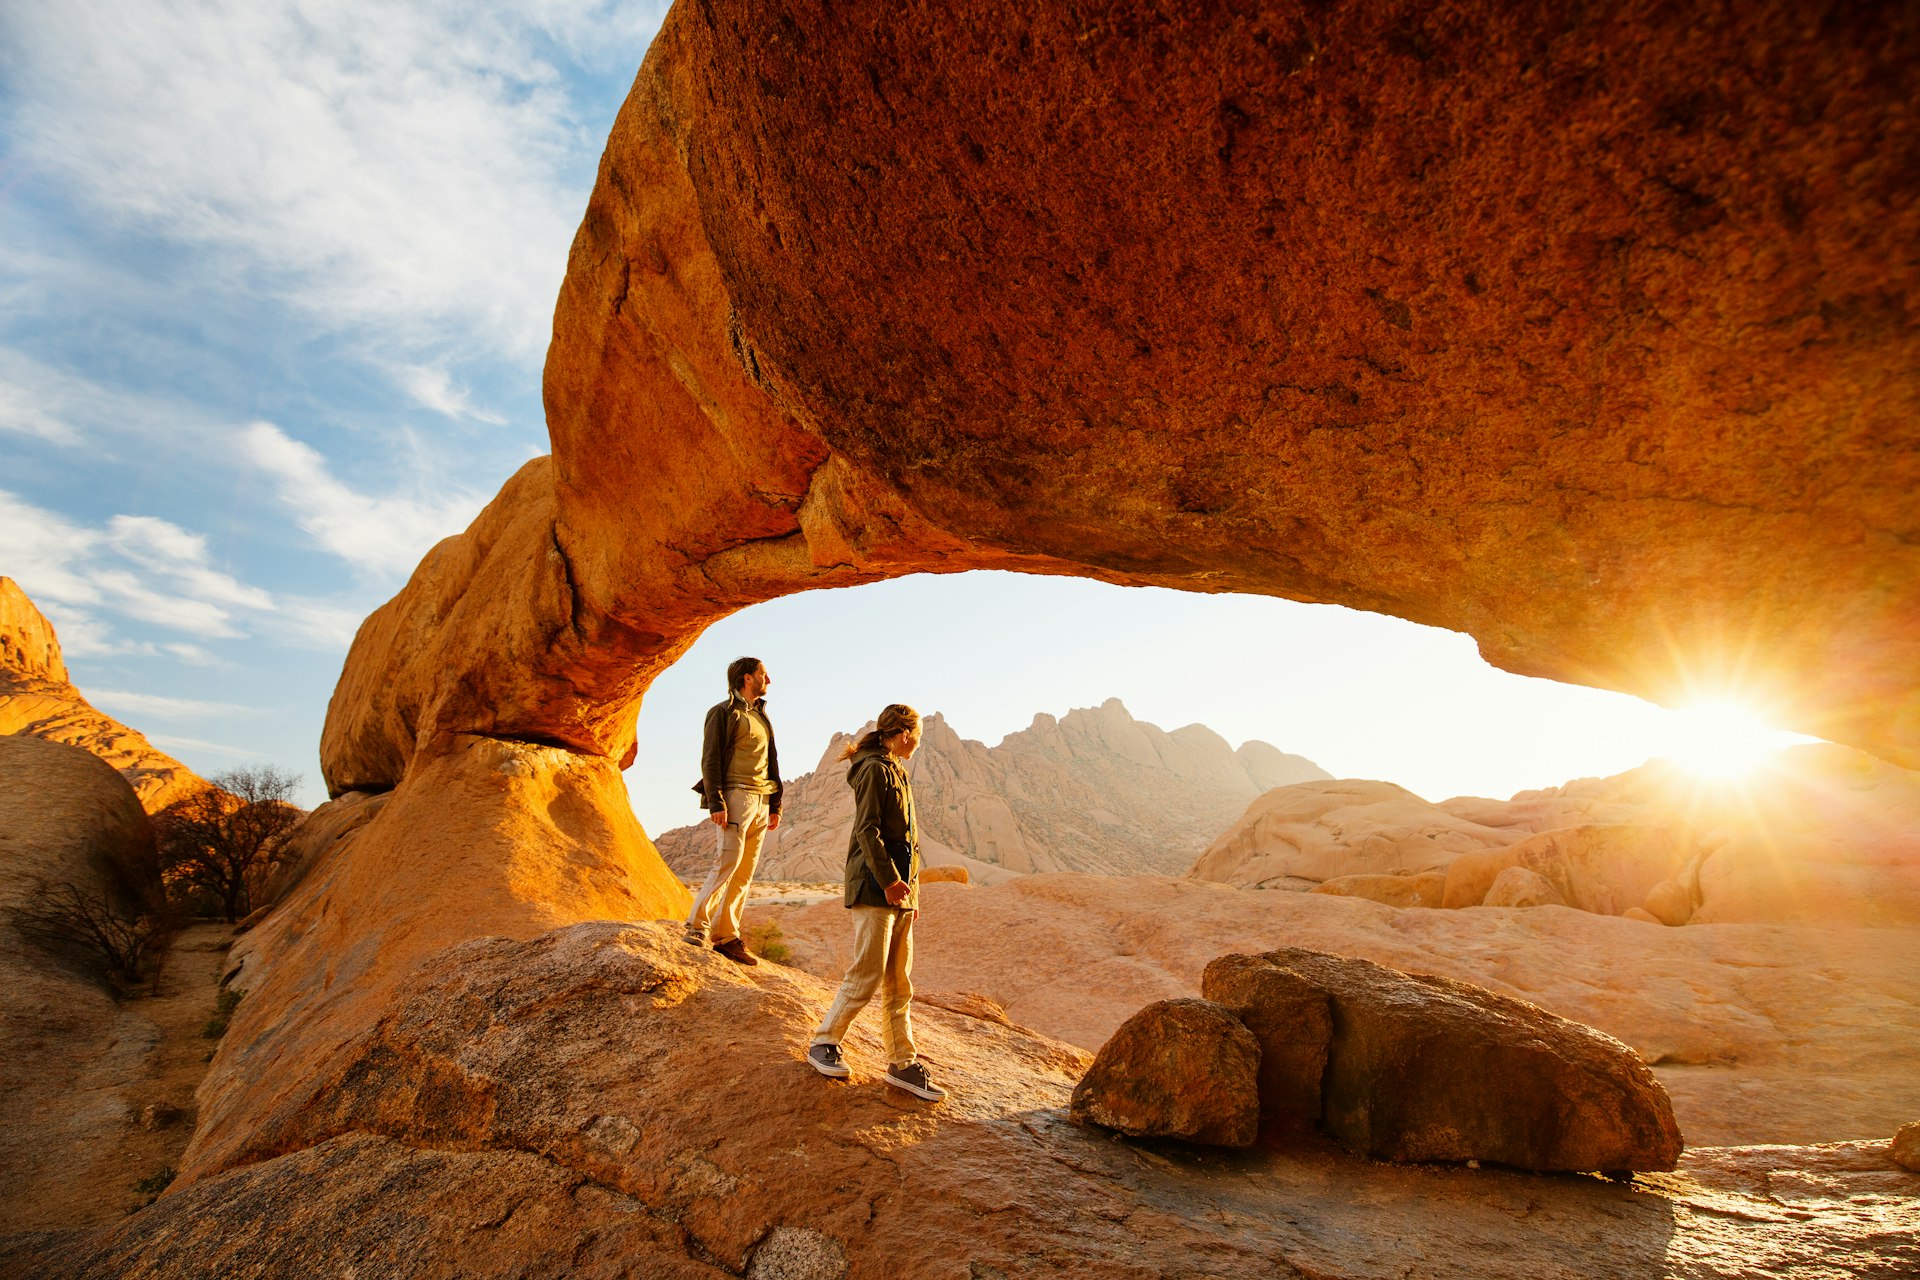 Family father and daughter enjoying sunrise in Spitzkoppe area with picturesque stone arches and unique rock formations in Damaraland Namibia